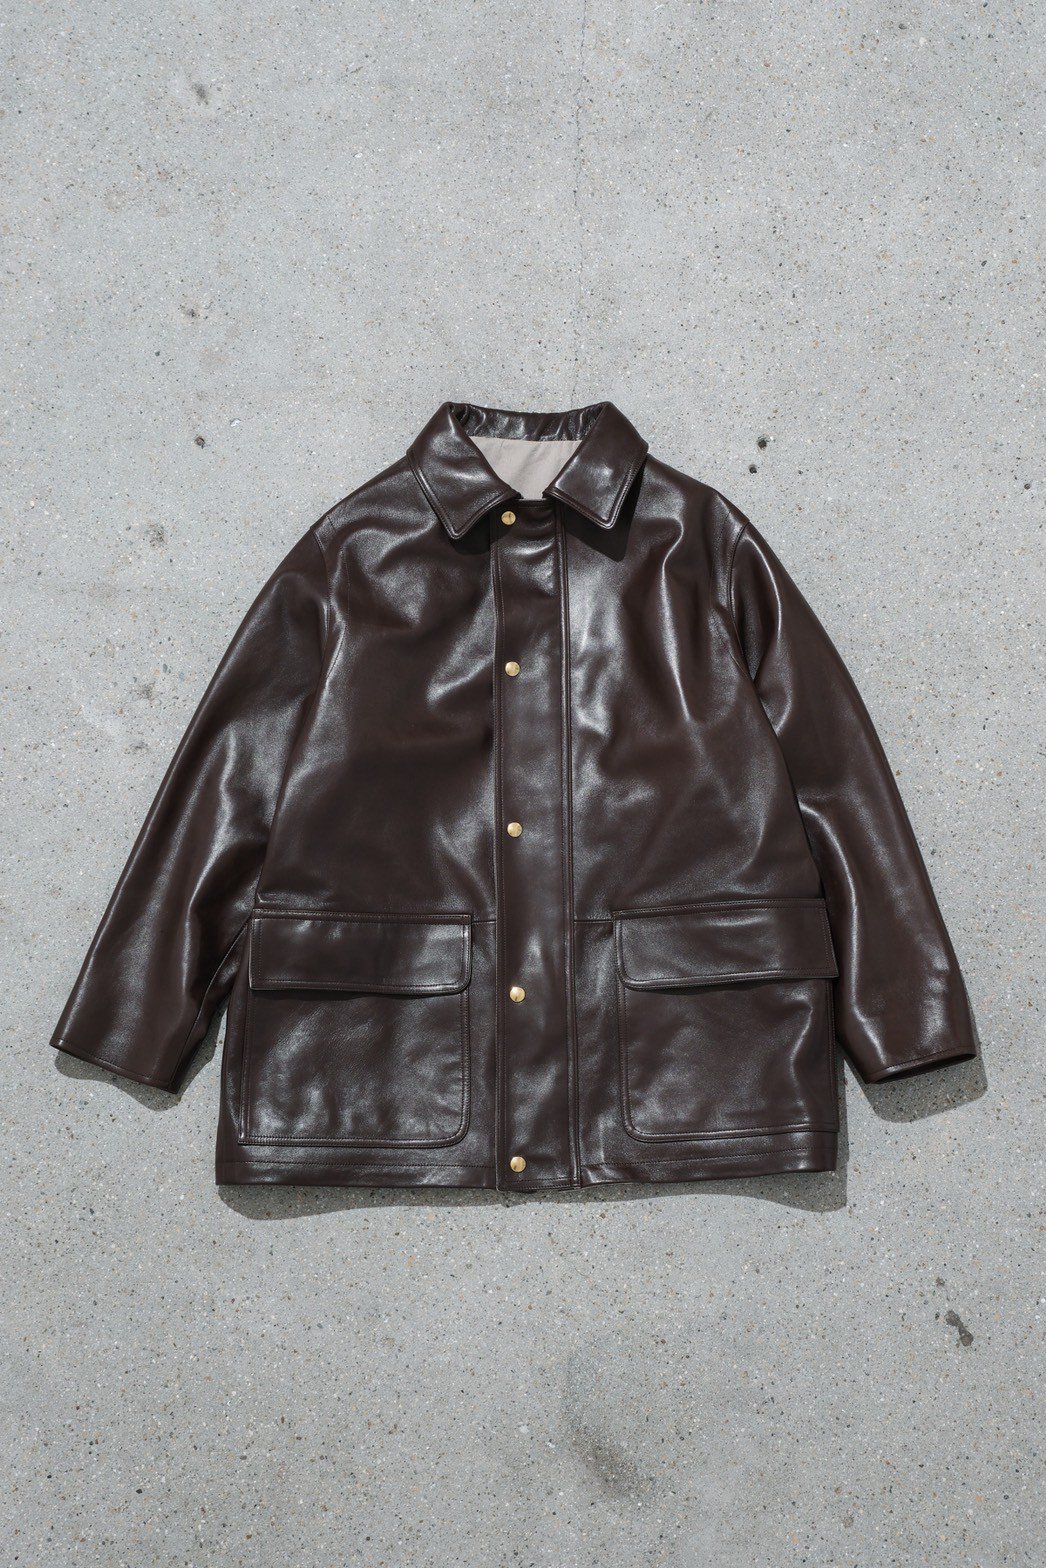 A.PRESSE / Leather Hunting Coat 